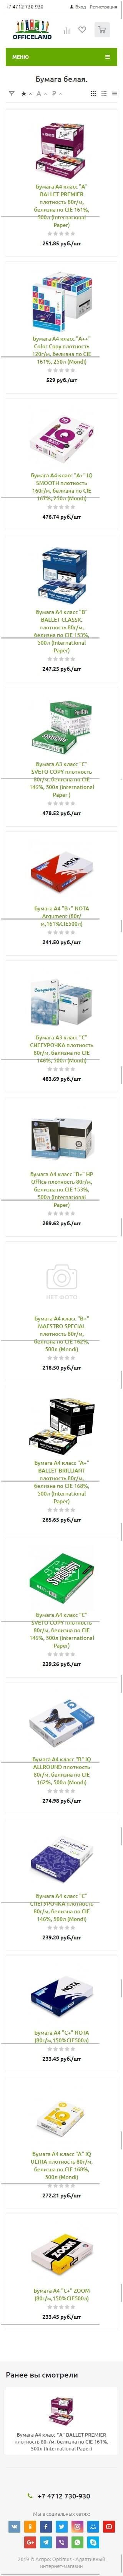 image of the mobile version of the site «Officeland»